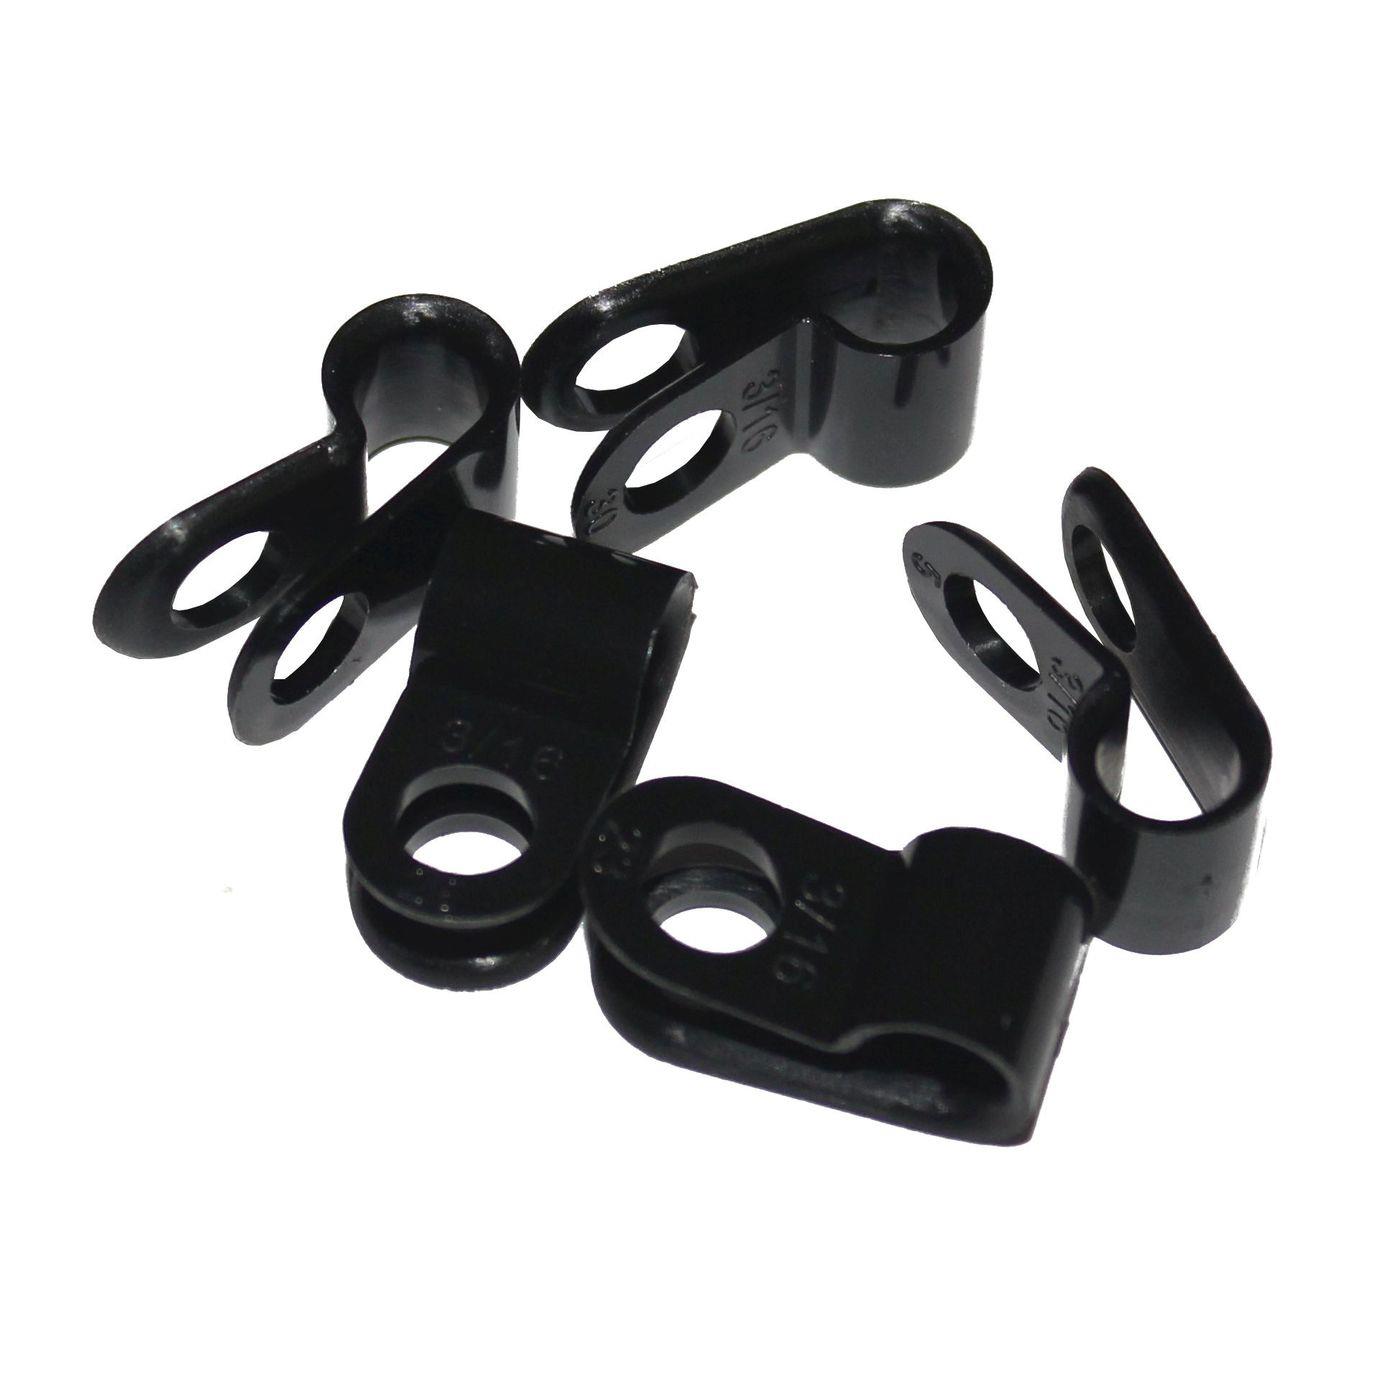 100x P-Clip for cable 6mm black Nylon Cable clamp Cable fixation Chassis clamps